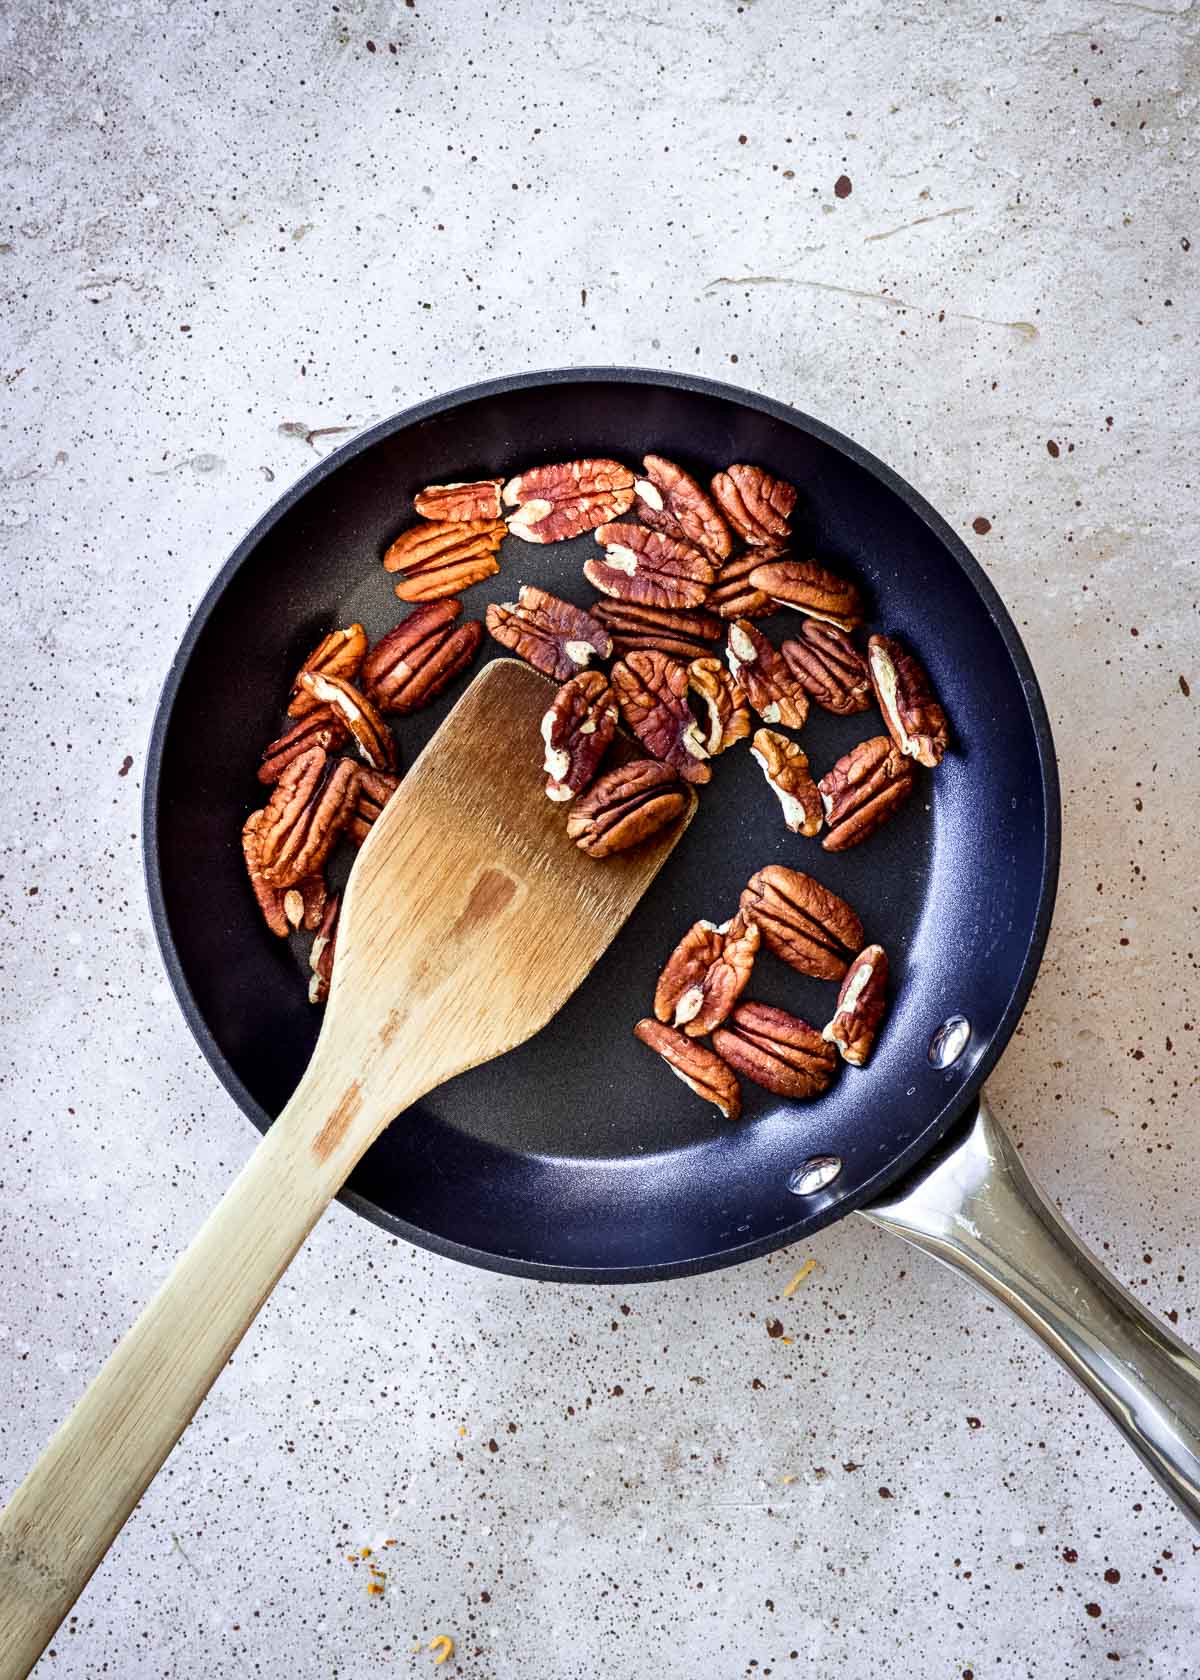 Pecans being toasted in shallow small skillet, with wooden spatula.